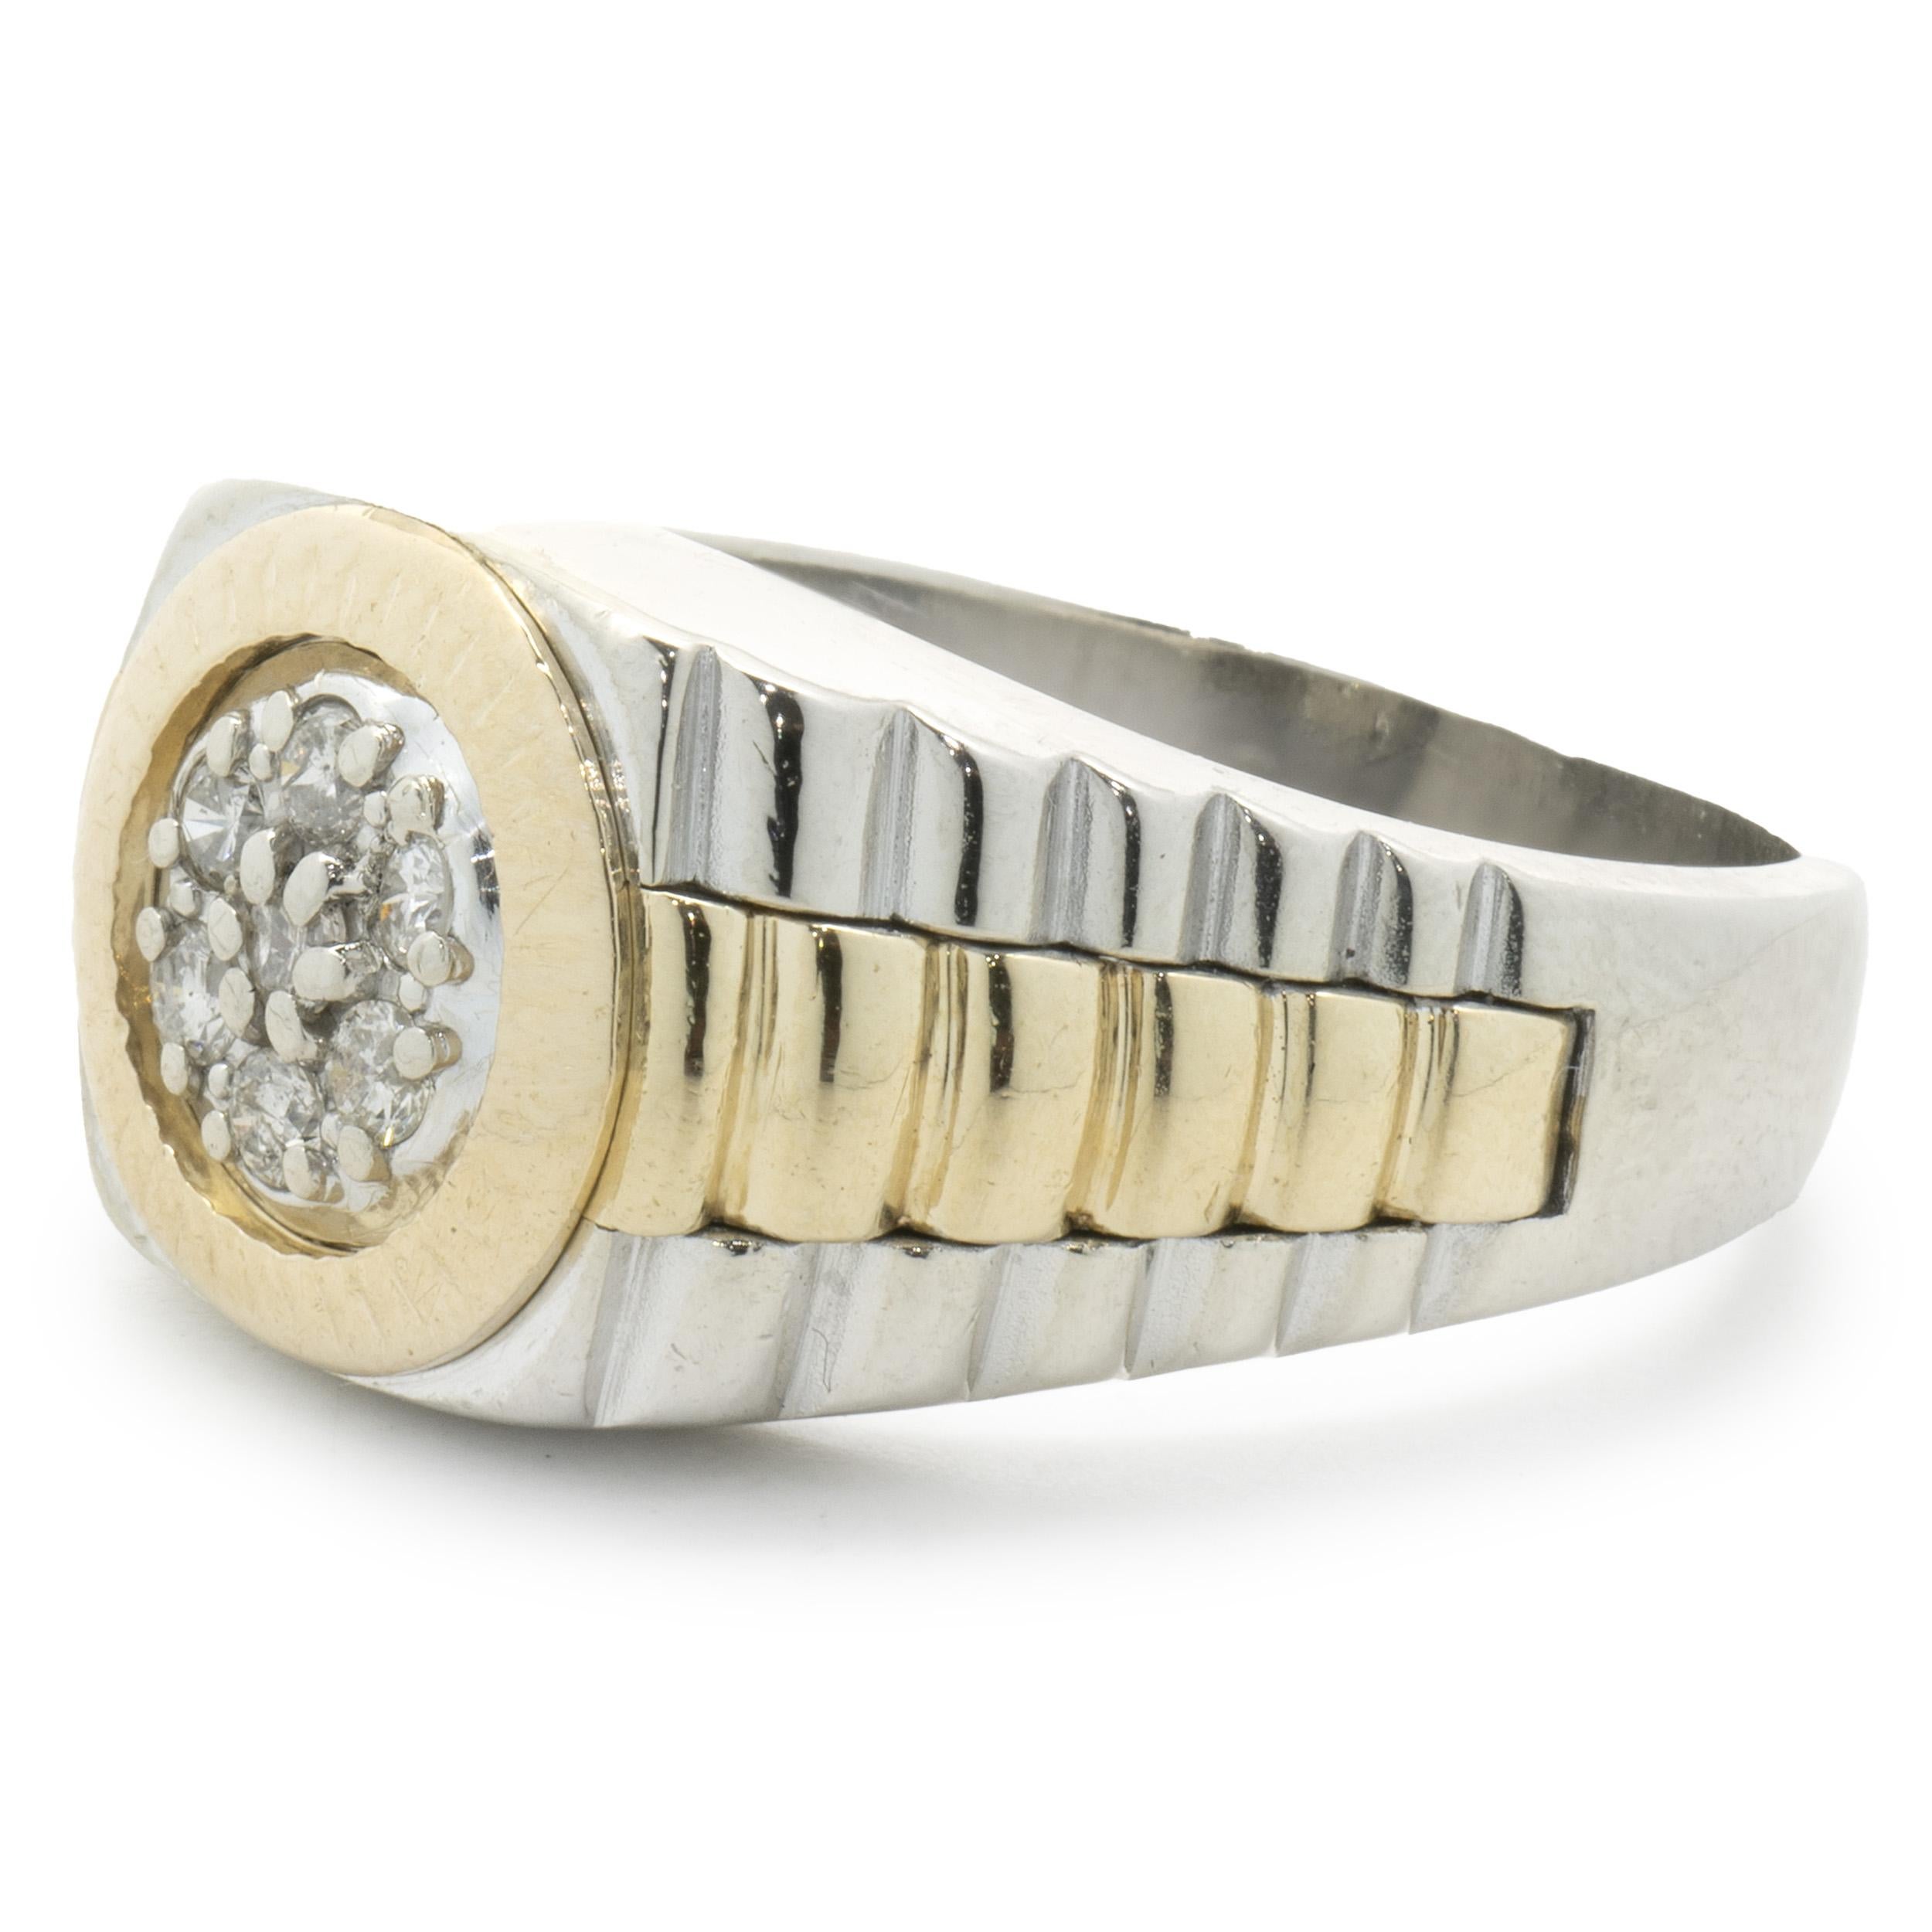 Designer: custom
Material: 14K white & yellow gold
Diamond: 7 round brilliant cut = 0.20cttw
Color: J
Clarity: I1-2
Ring size: 10.5 (please allow two additional shipping days for sizing requests)
Weight:  11.08 grams